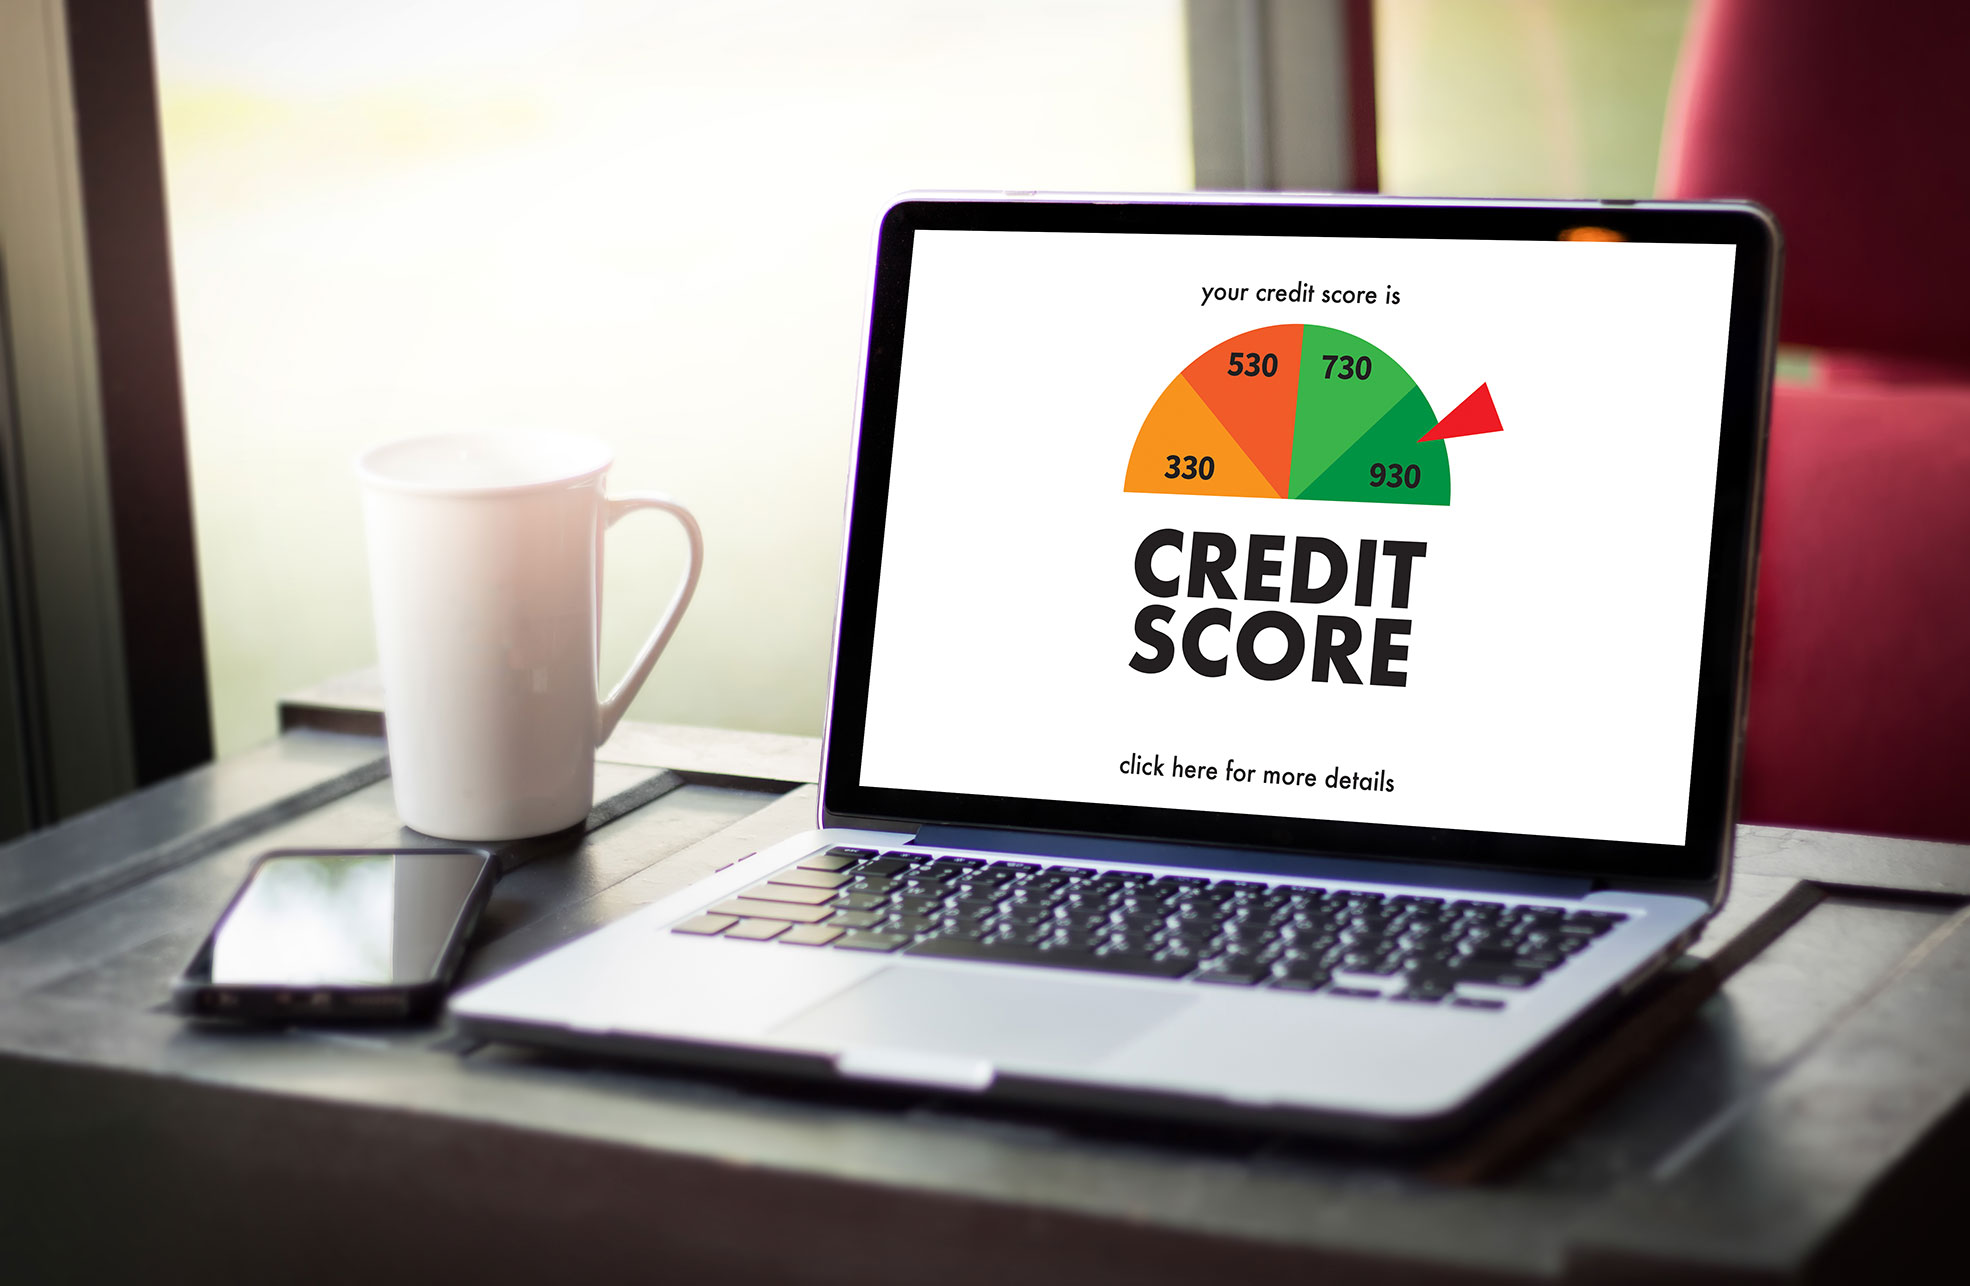 How Often Does Your Credit Score Update?